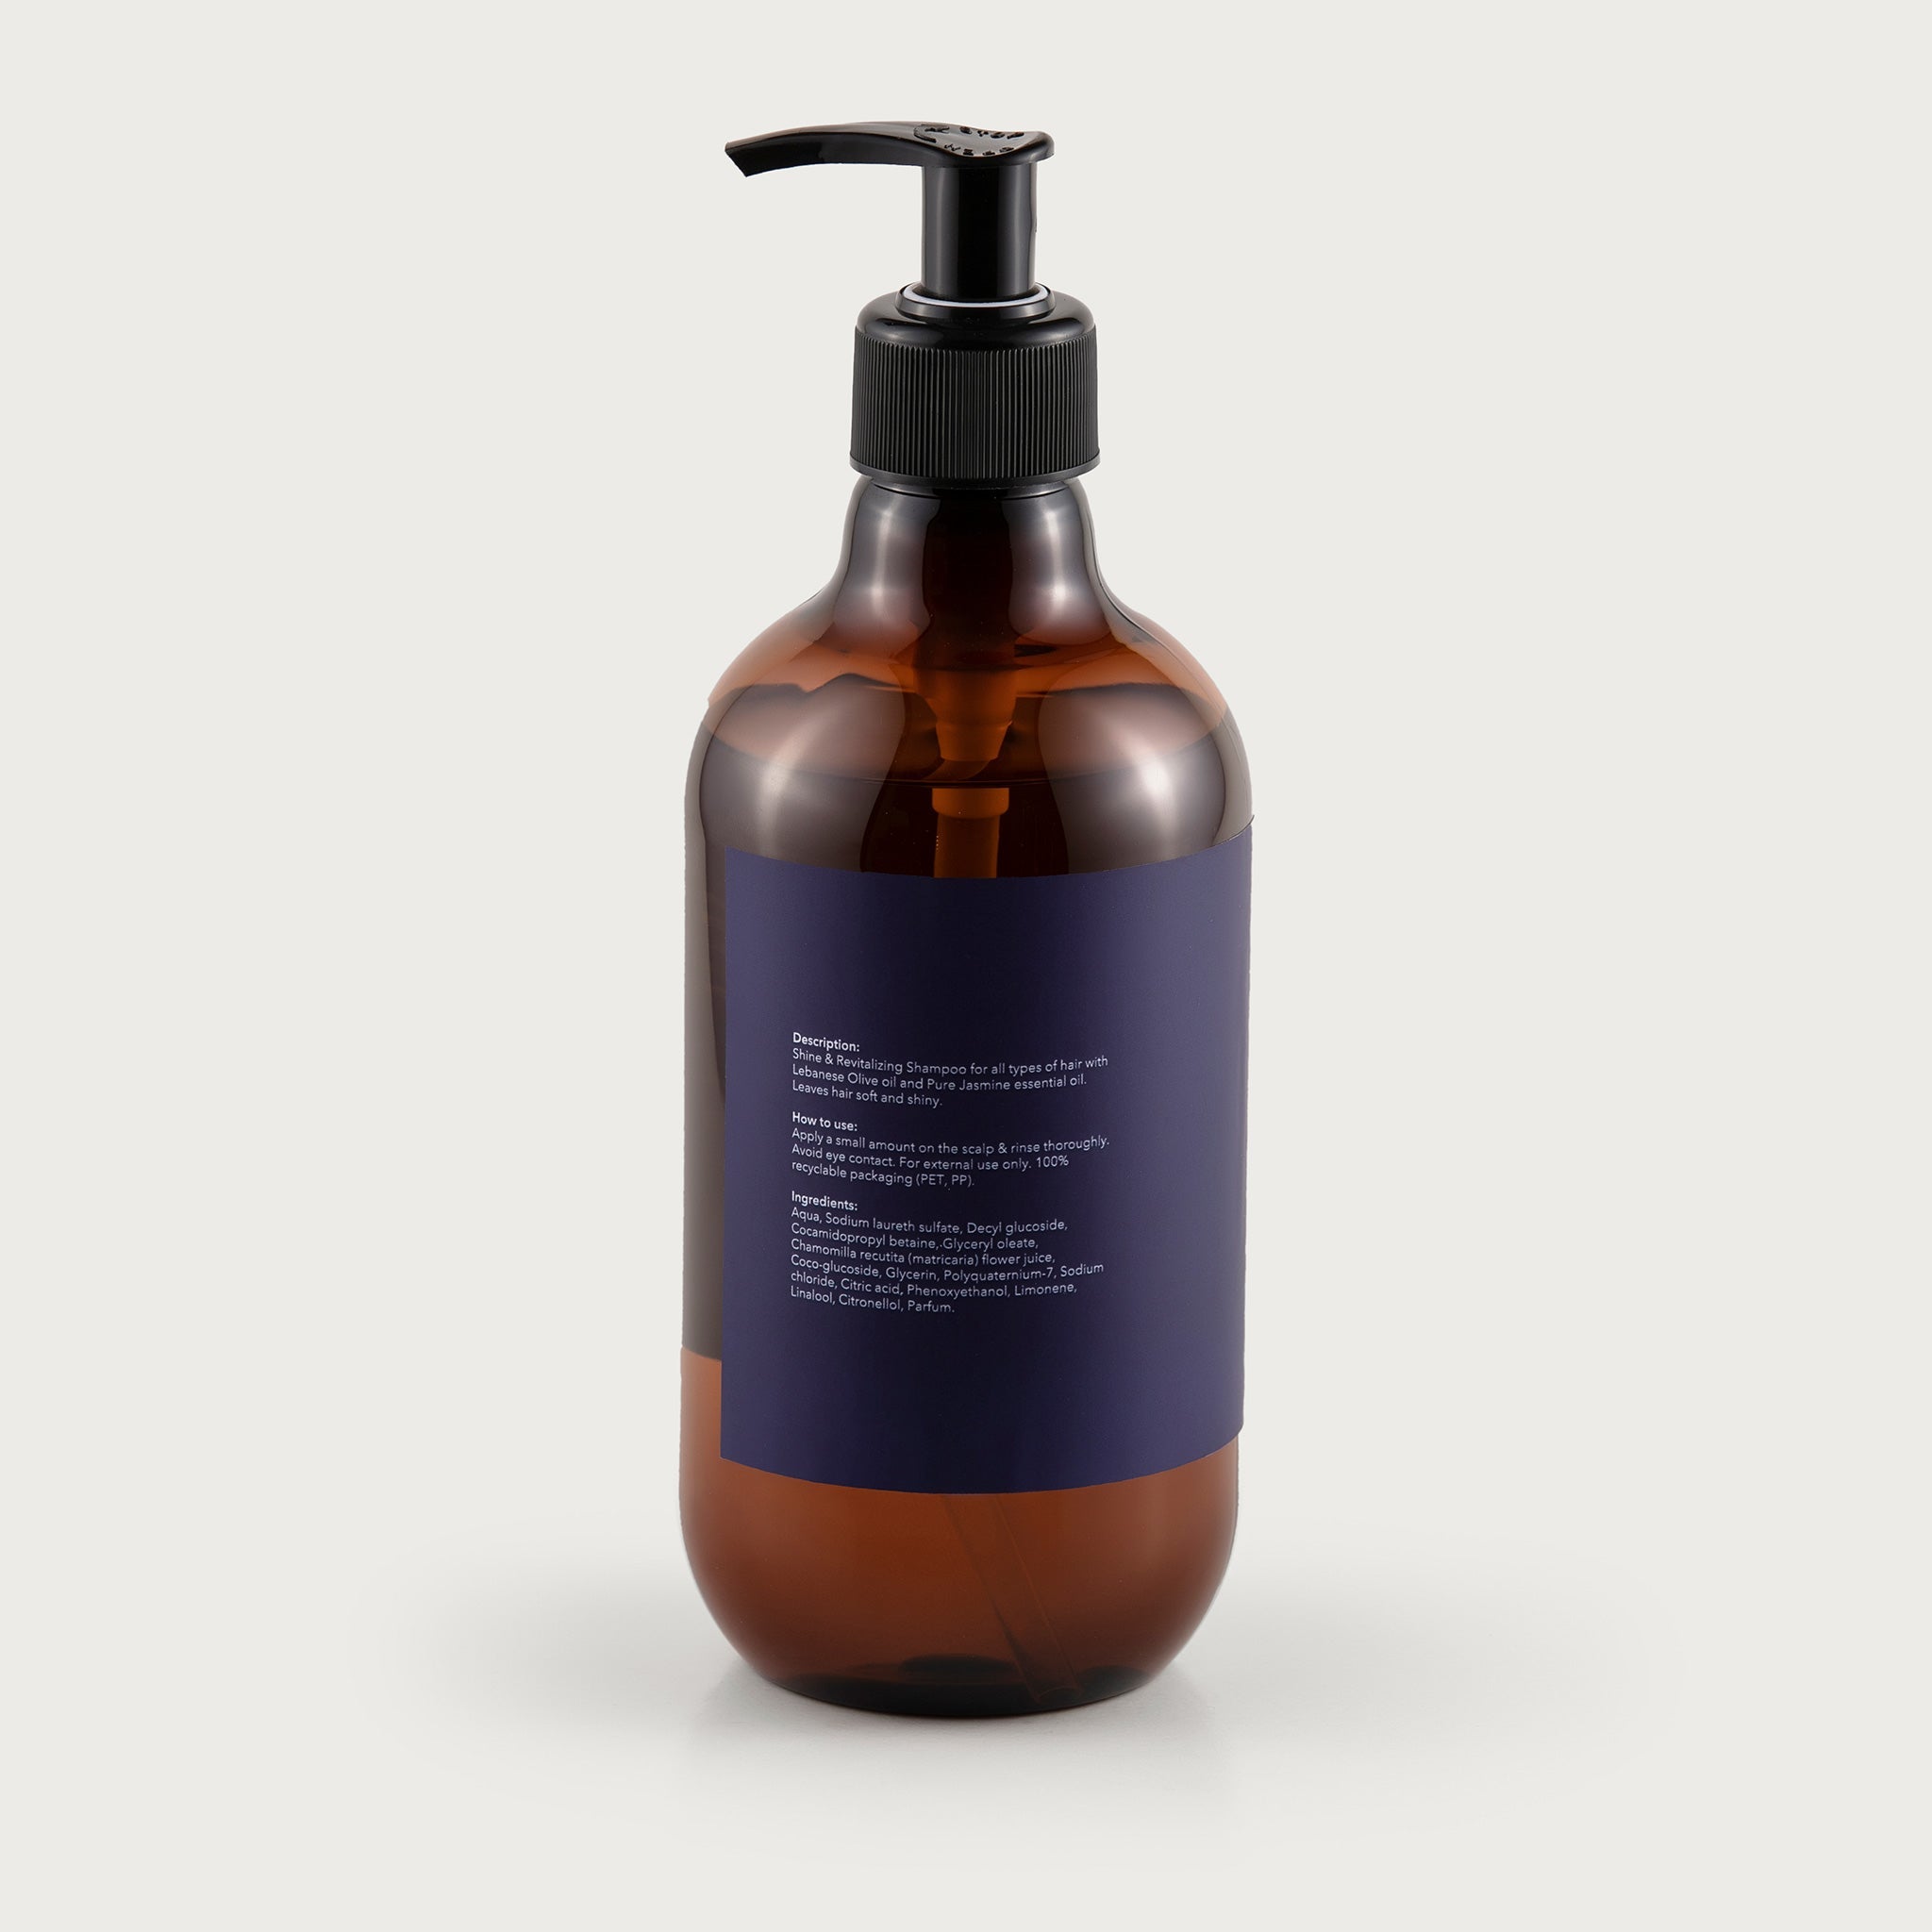 This pump top bottle is amber in color so you can see the clear shampoo inside. The label is deep purple and features the Salma logo and the Pure Jasmine scent notated.